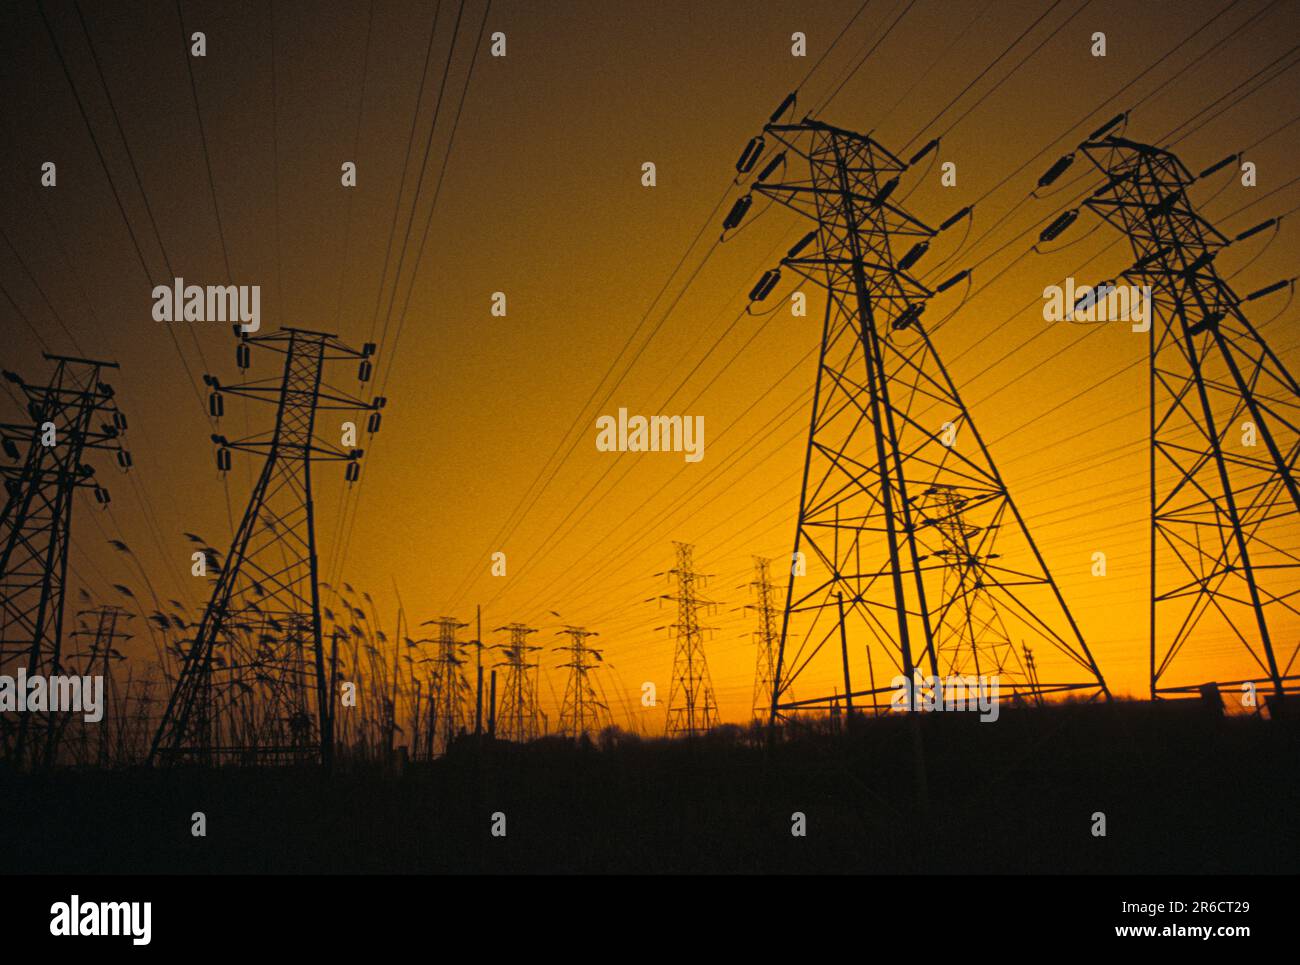 High voltage lines carried by steel towers silhouetted at sunset Stock Photo